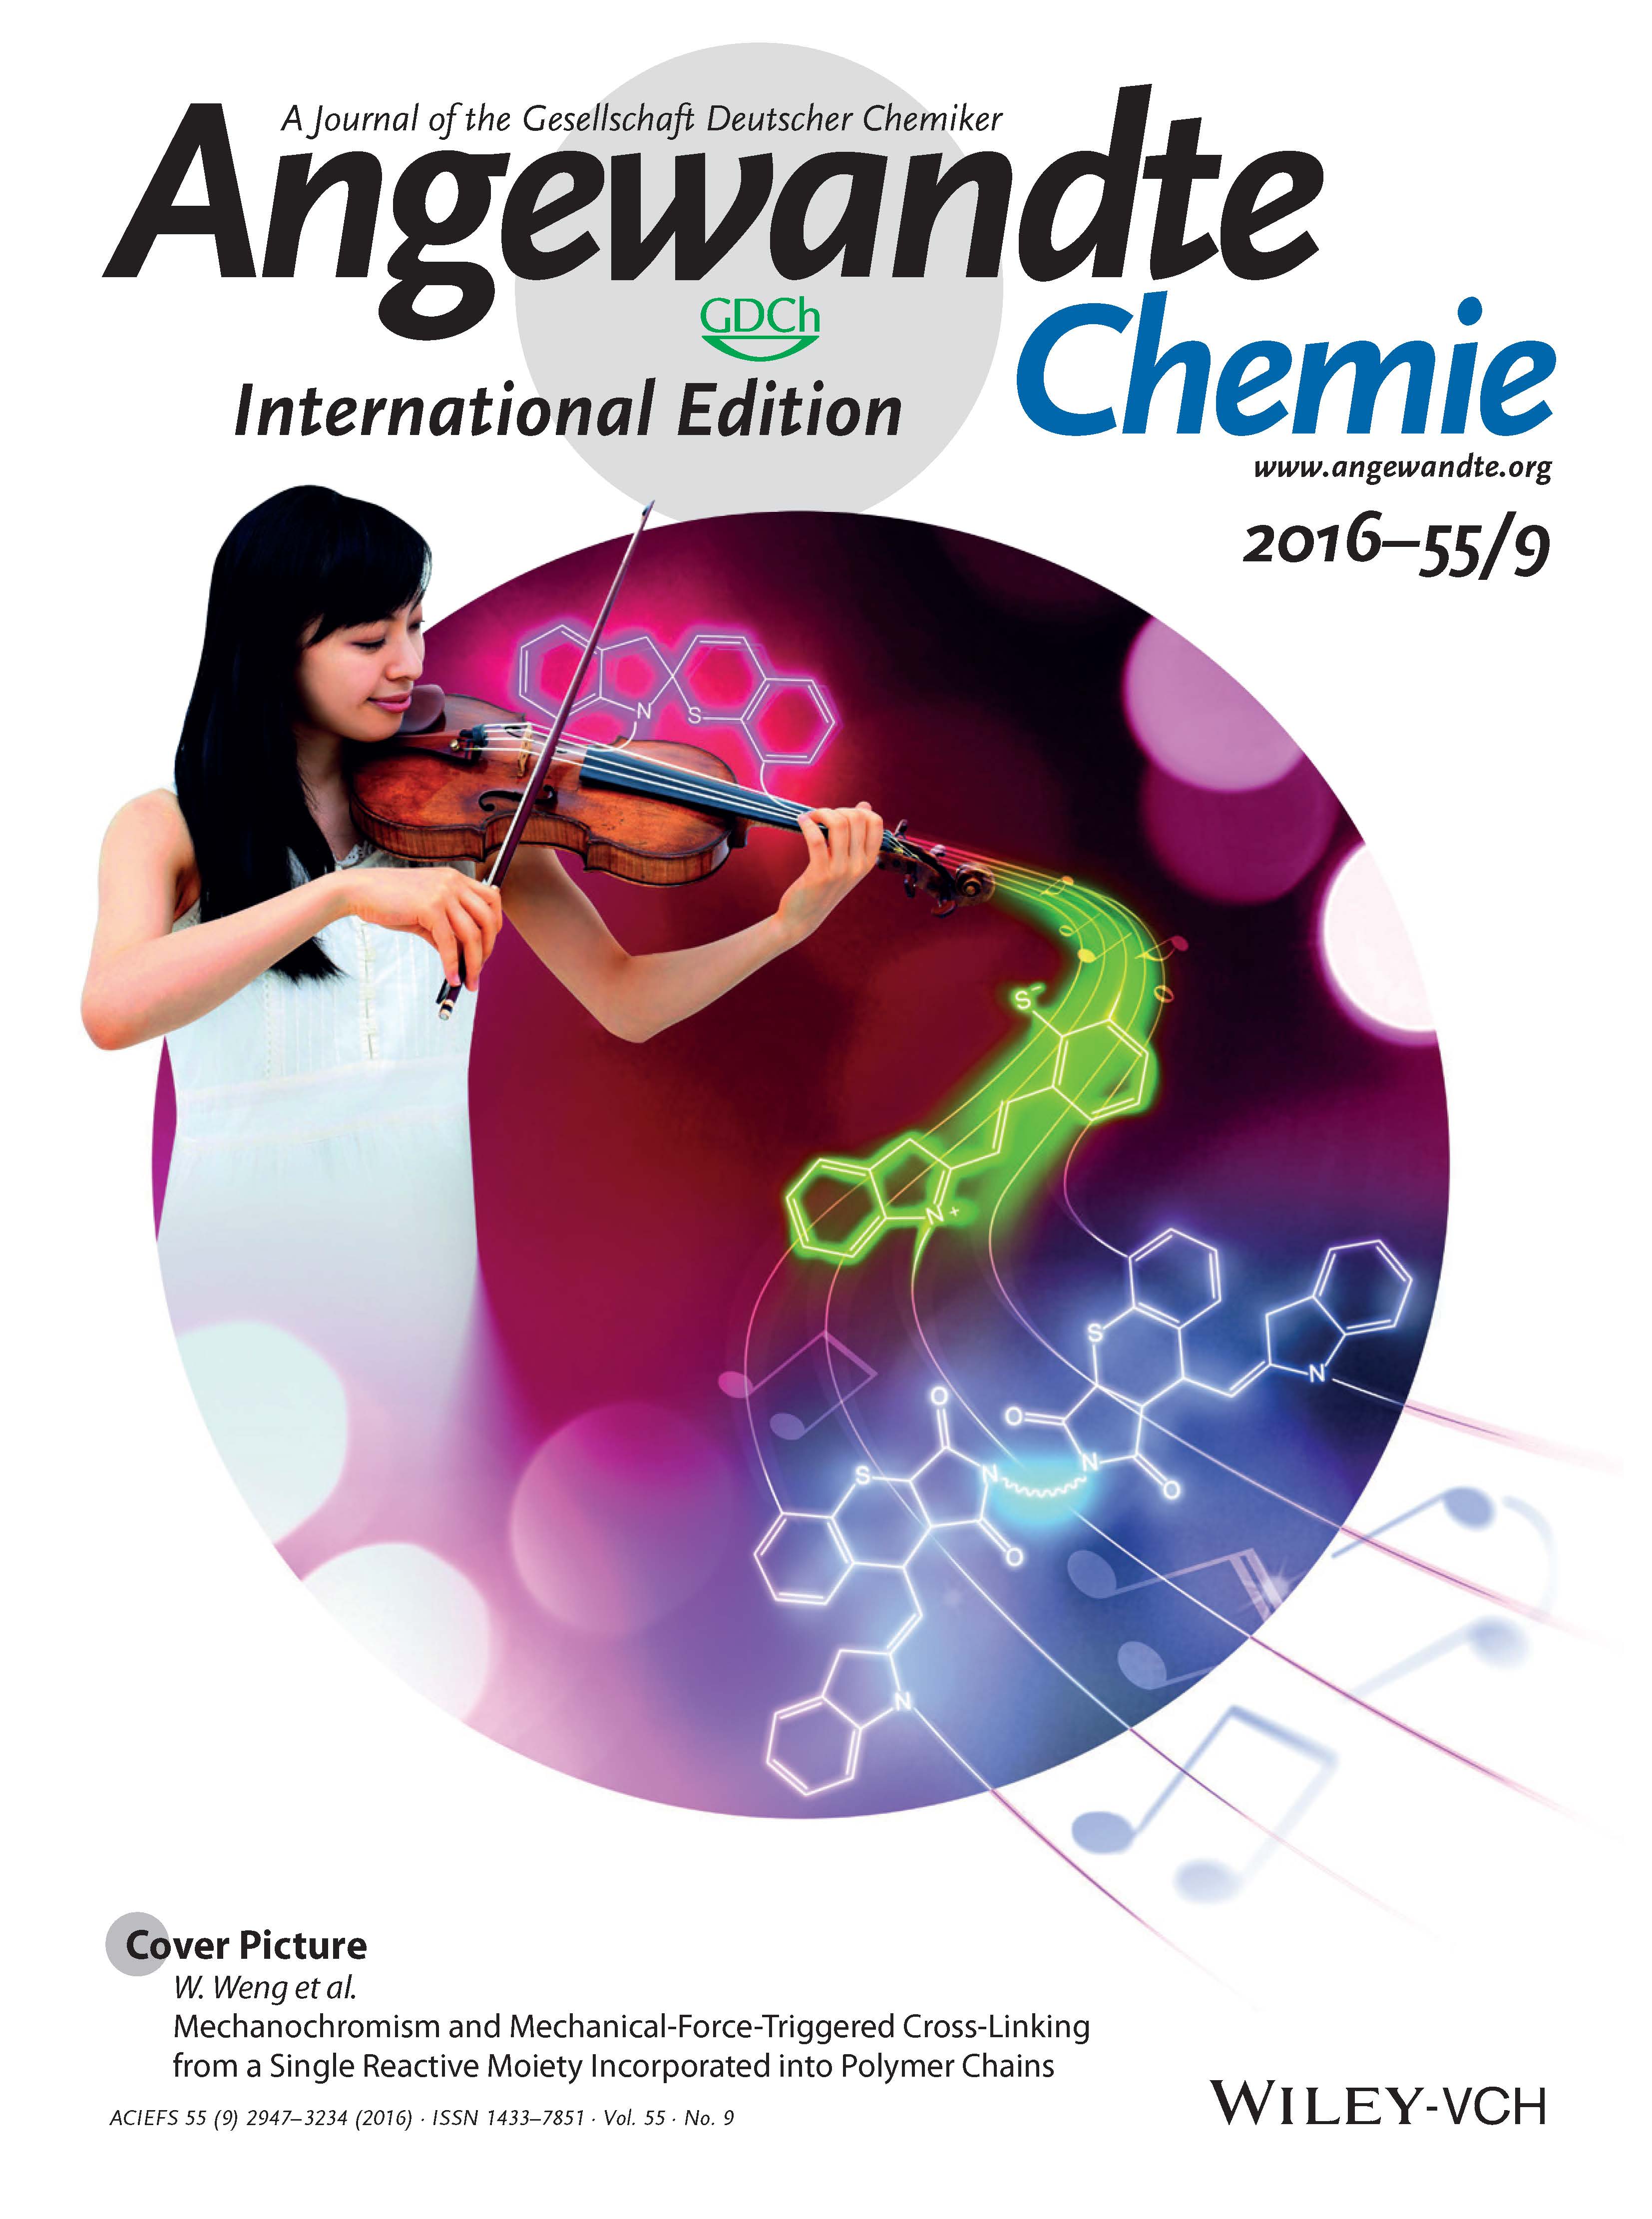 Angewandte Chemie March 2016 Cover